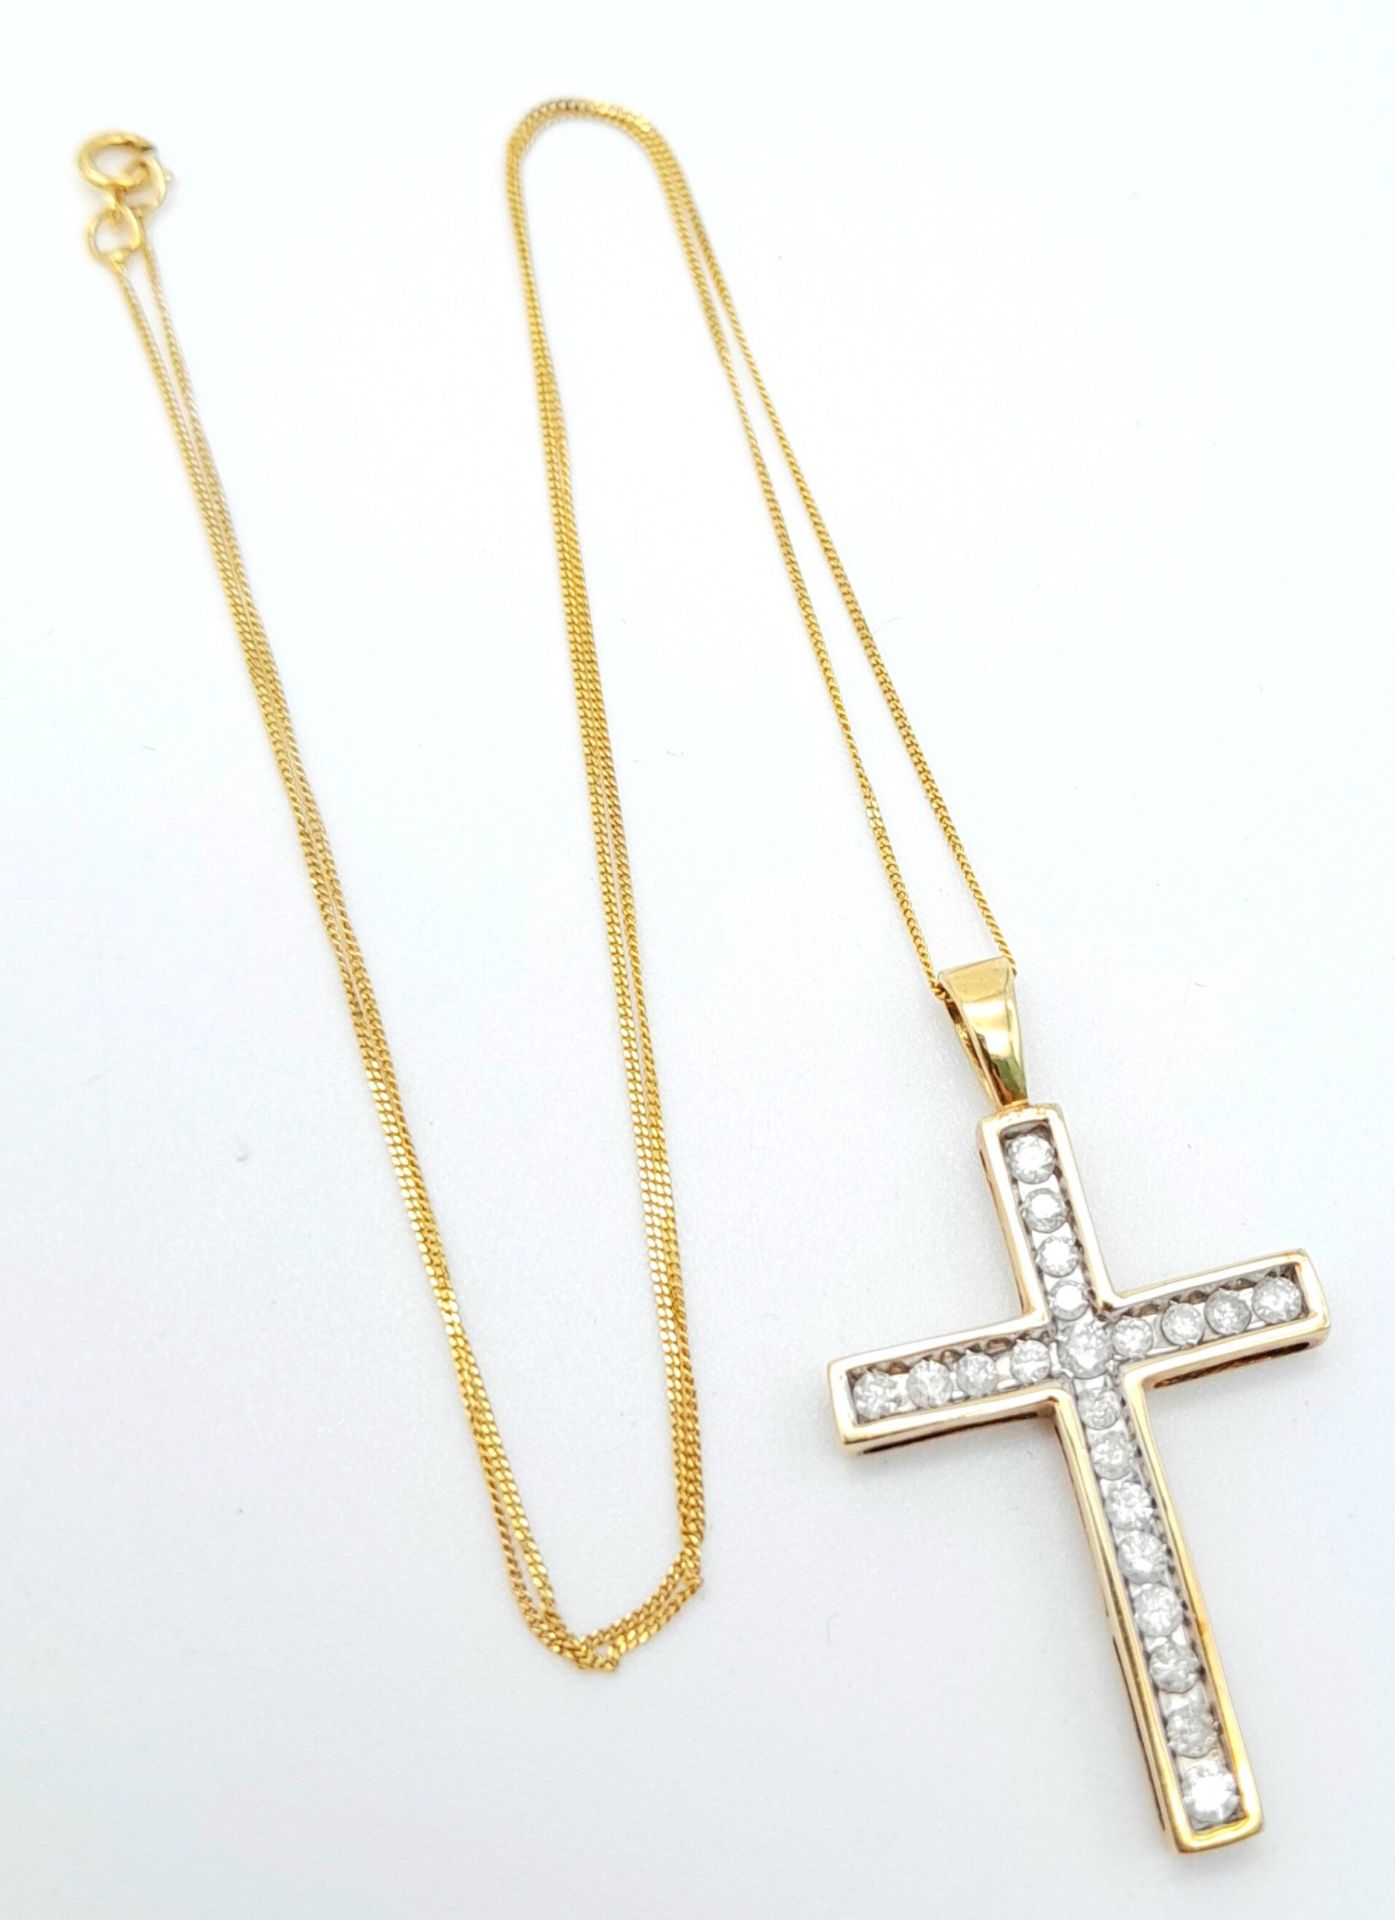 A 10K yellow gold diamond set cross pendant set on 16" 9K yellow gold fine curb chain, 2.4g total - Image 2 of 5